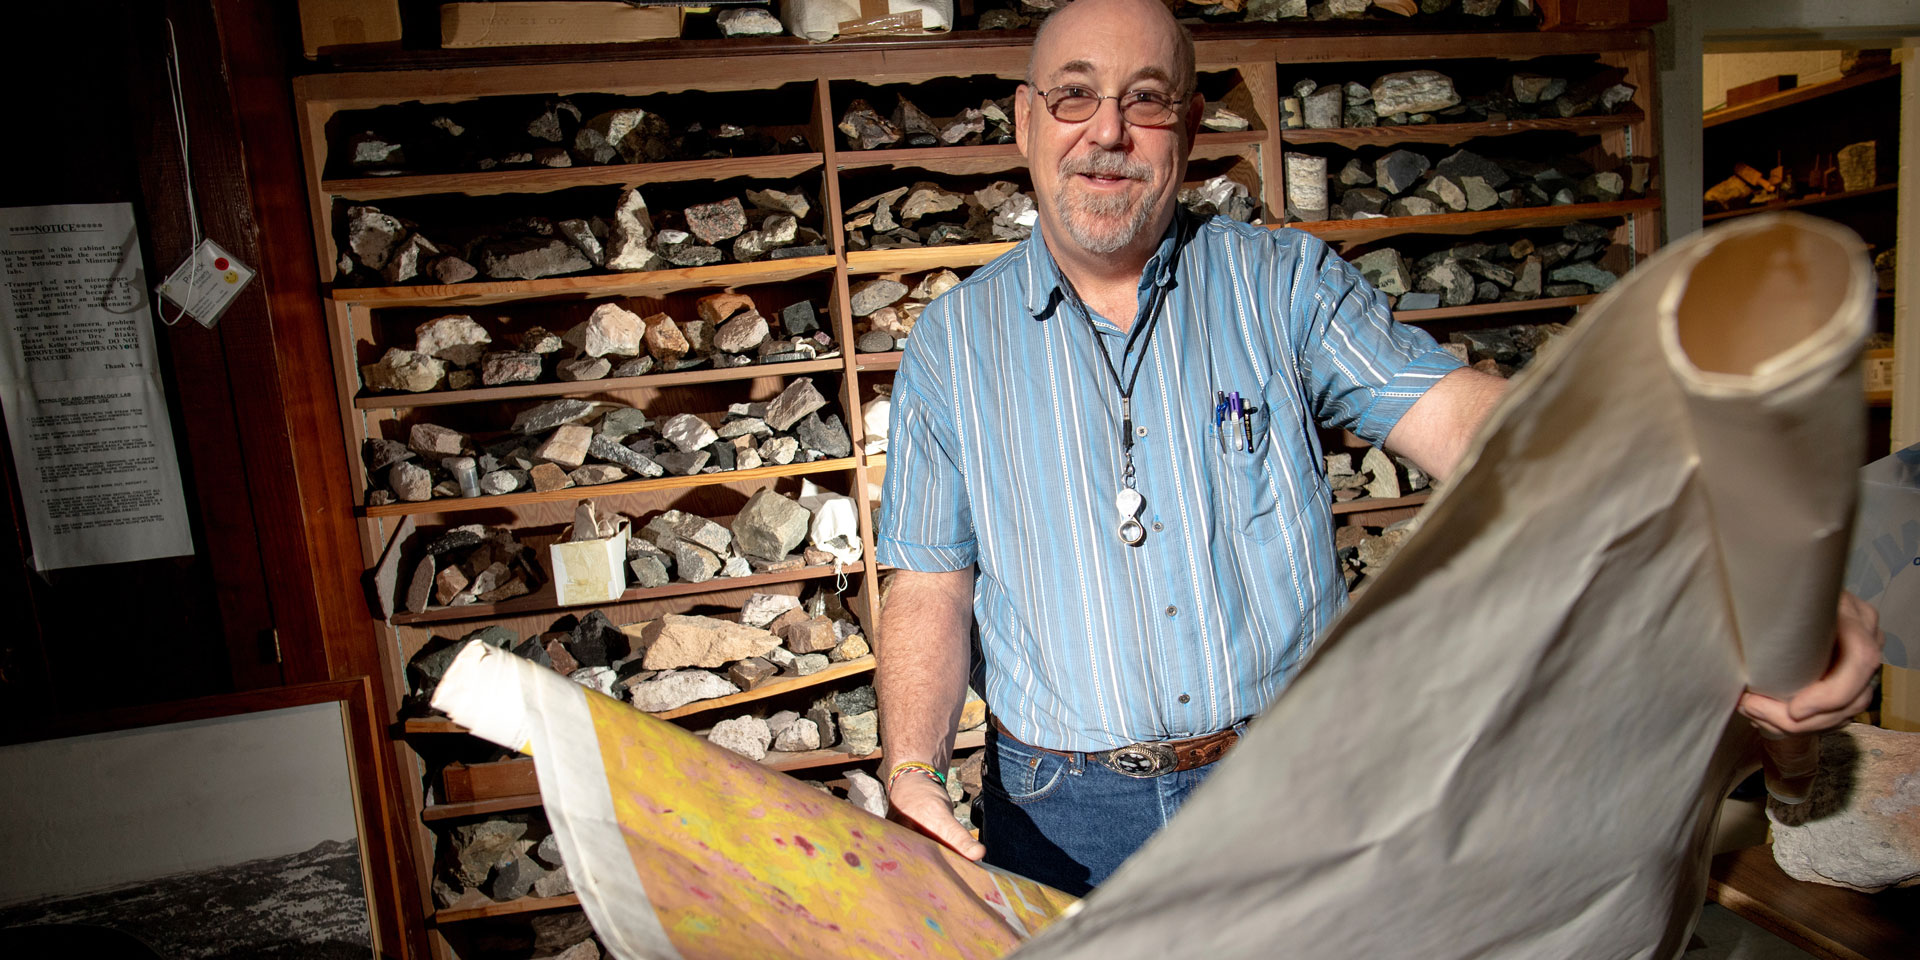 A professor stands holding a map in front of a shelf full of rocks 